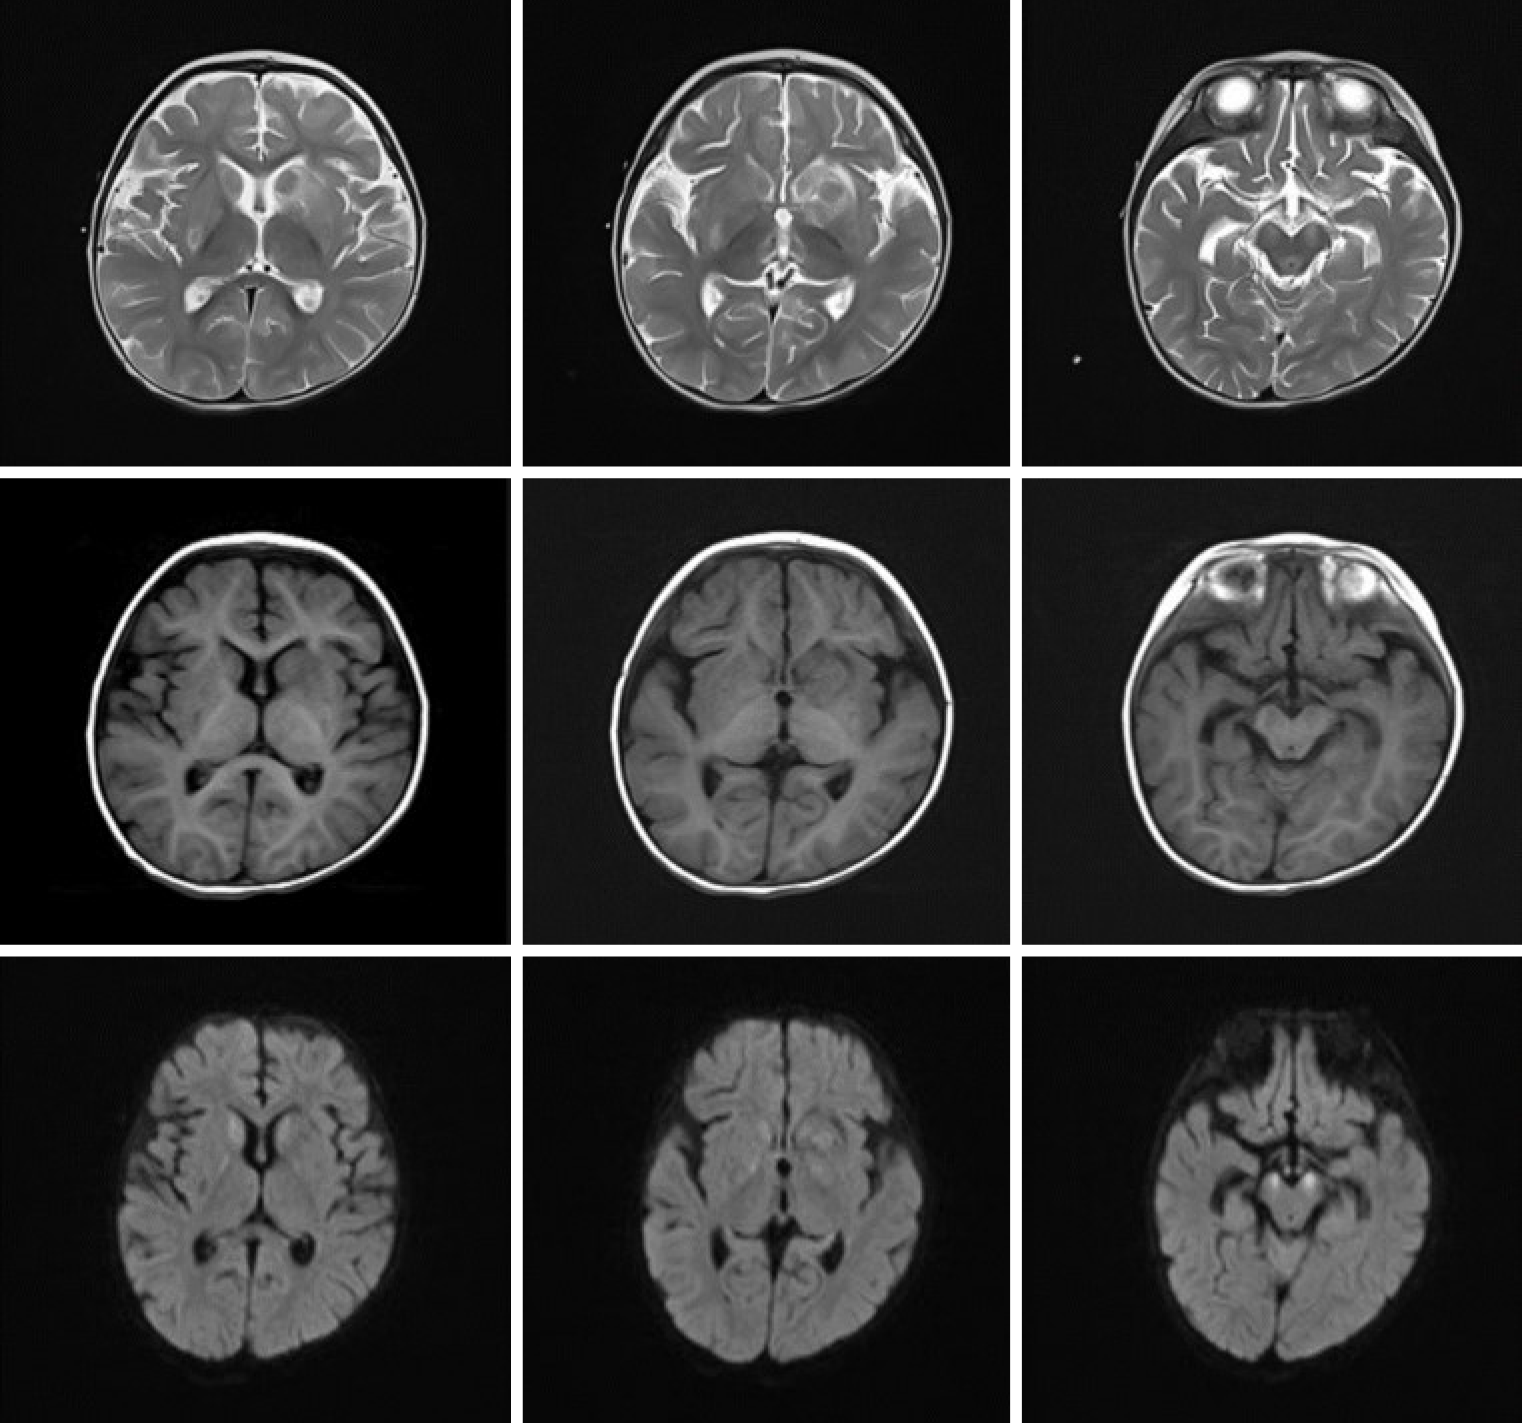 Emergence of lesions outside of the basal ganglia and irreversible ...